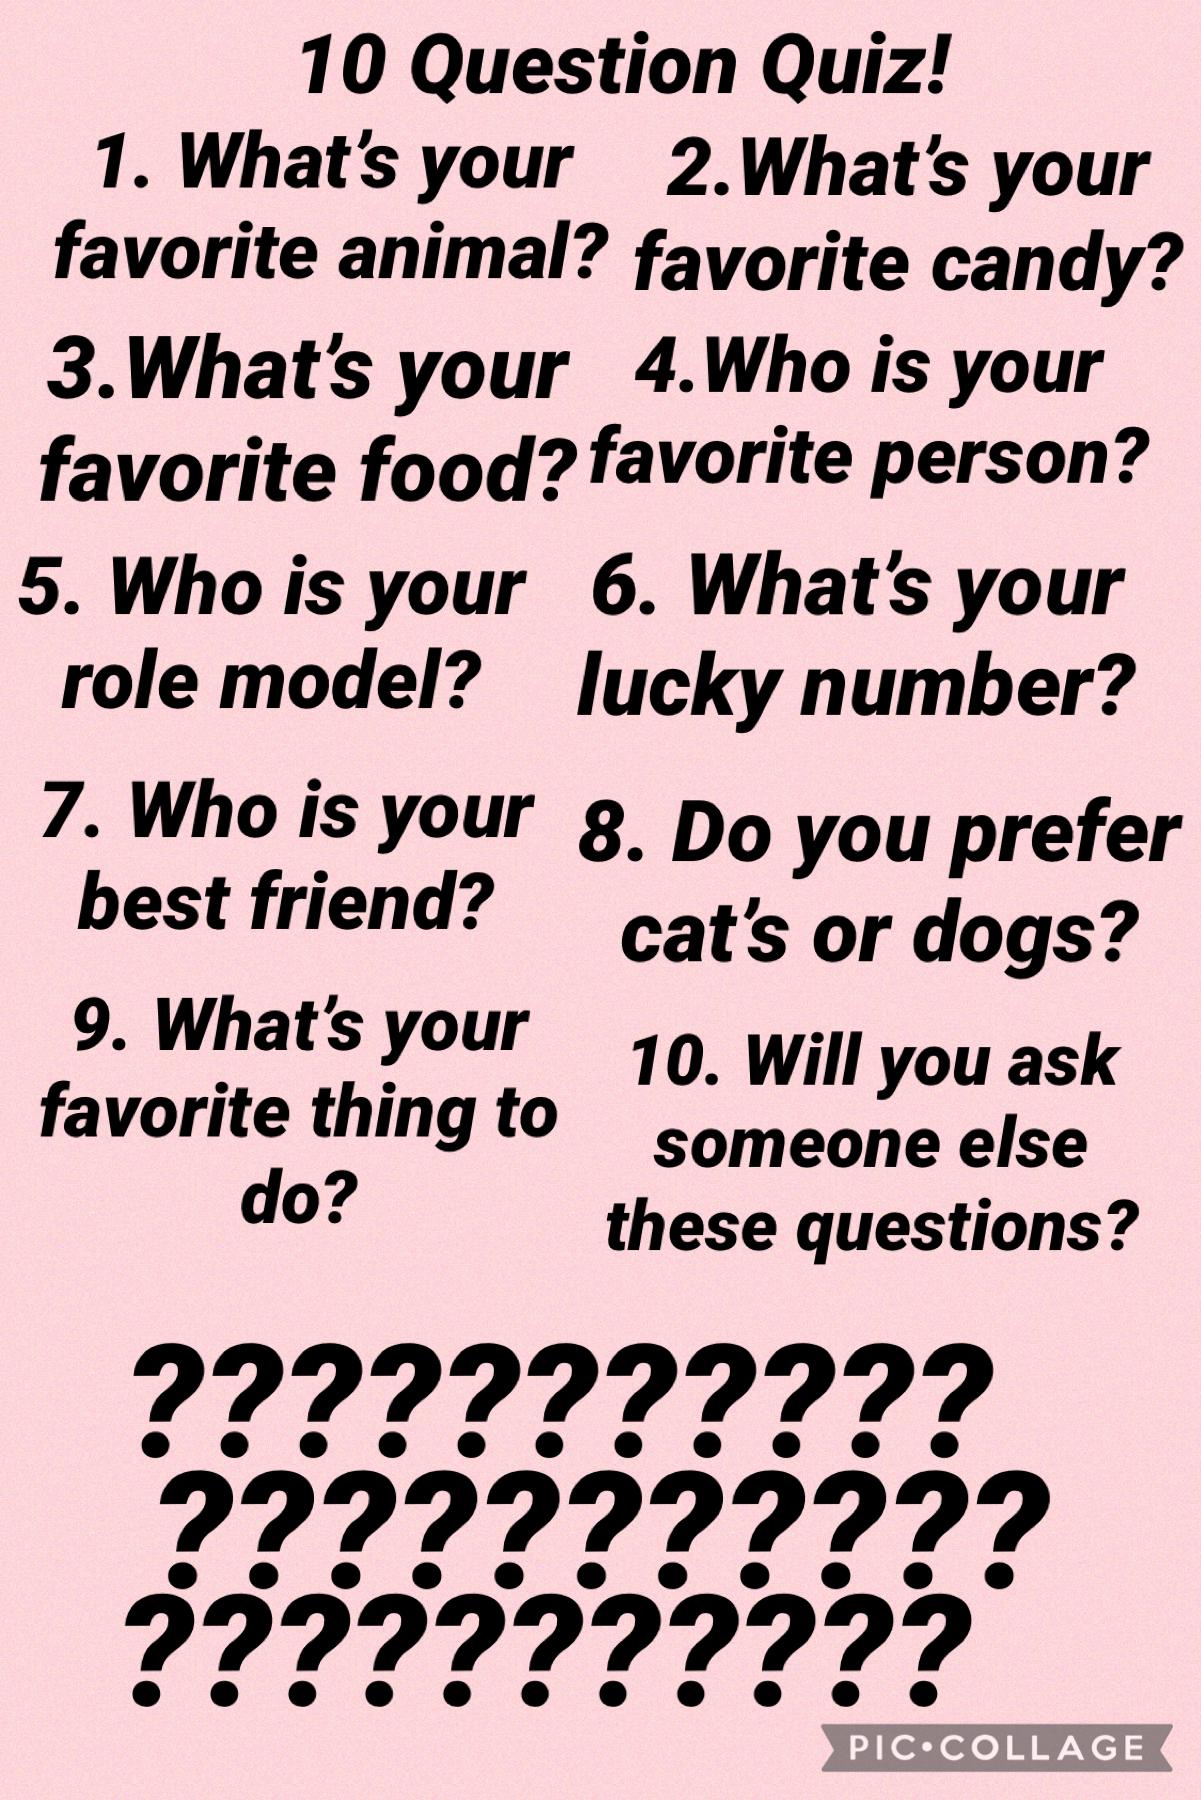 10 Questions! First 3 to answer get shoutouts!